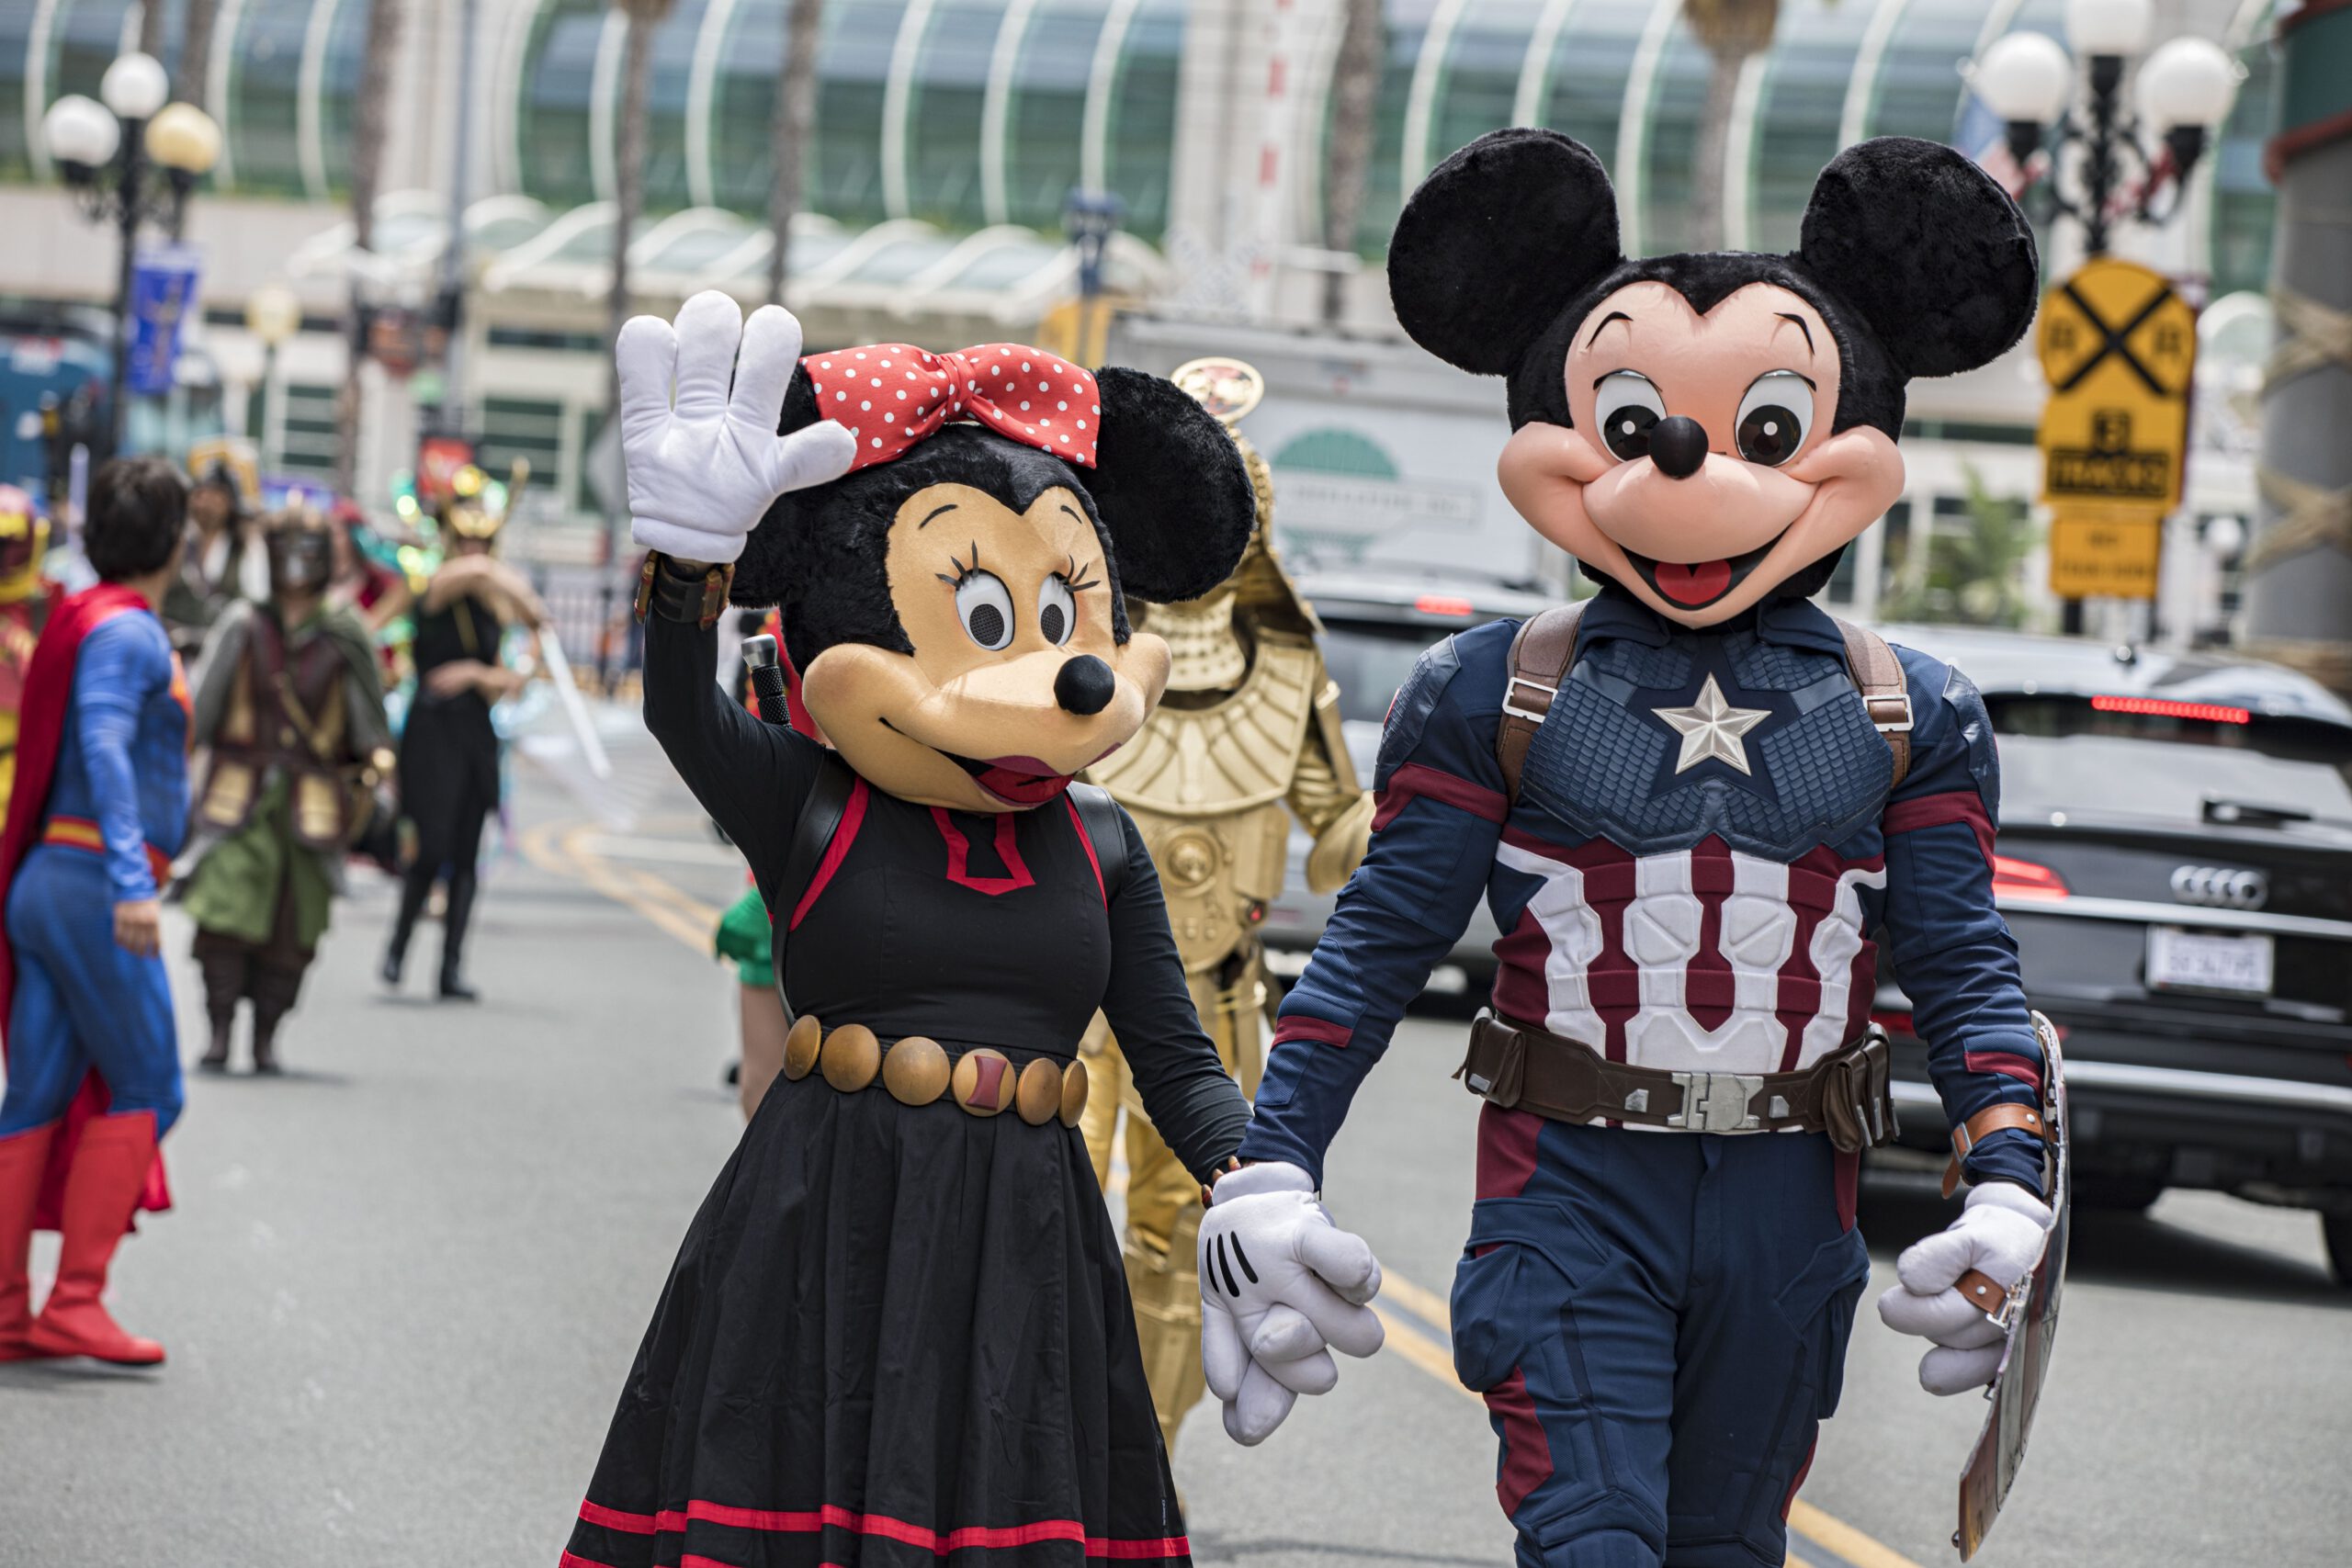 Comic Con attendees wearing Mickey and Minnie Mouse costumes